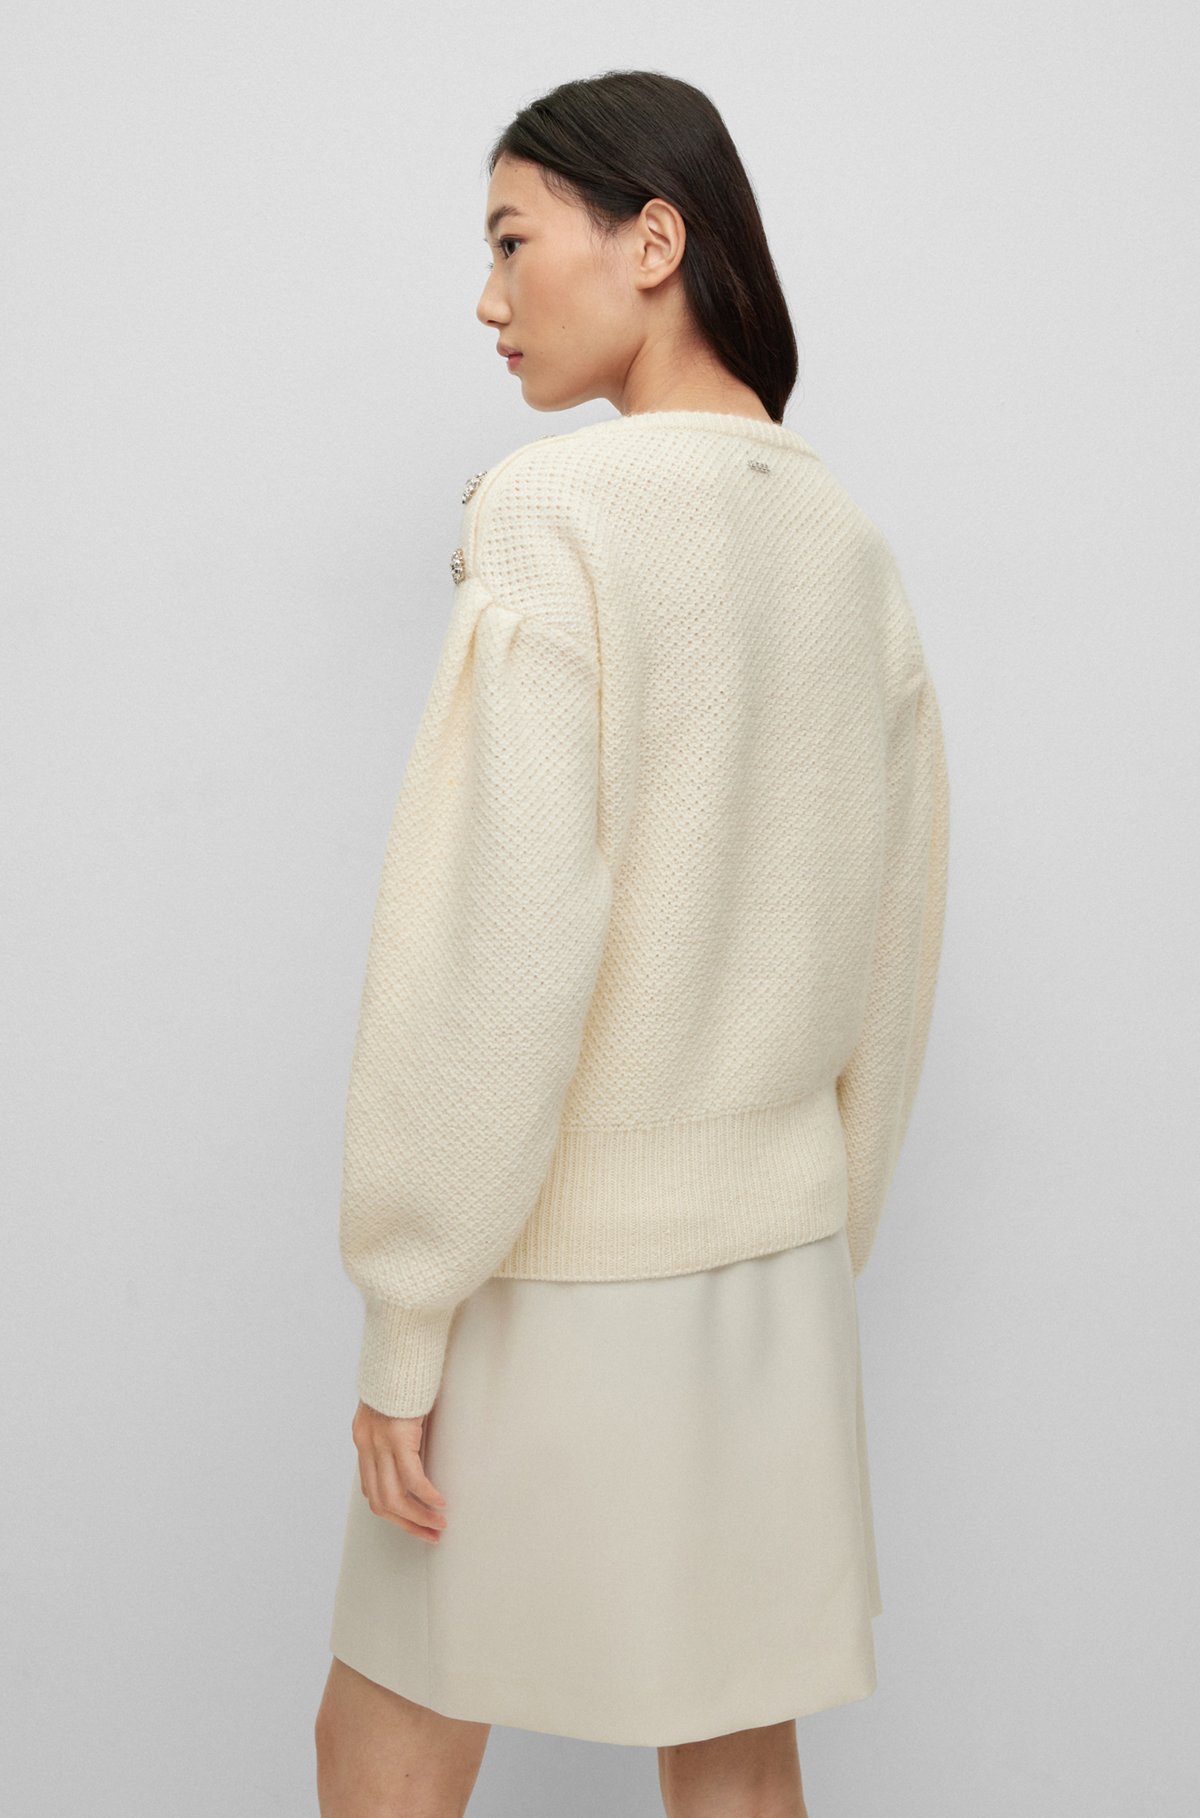 Wool-blend sweater with jeweled-button trim, White